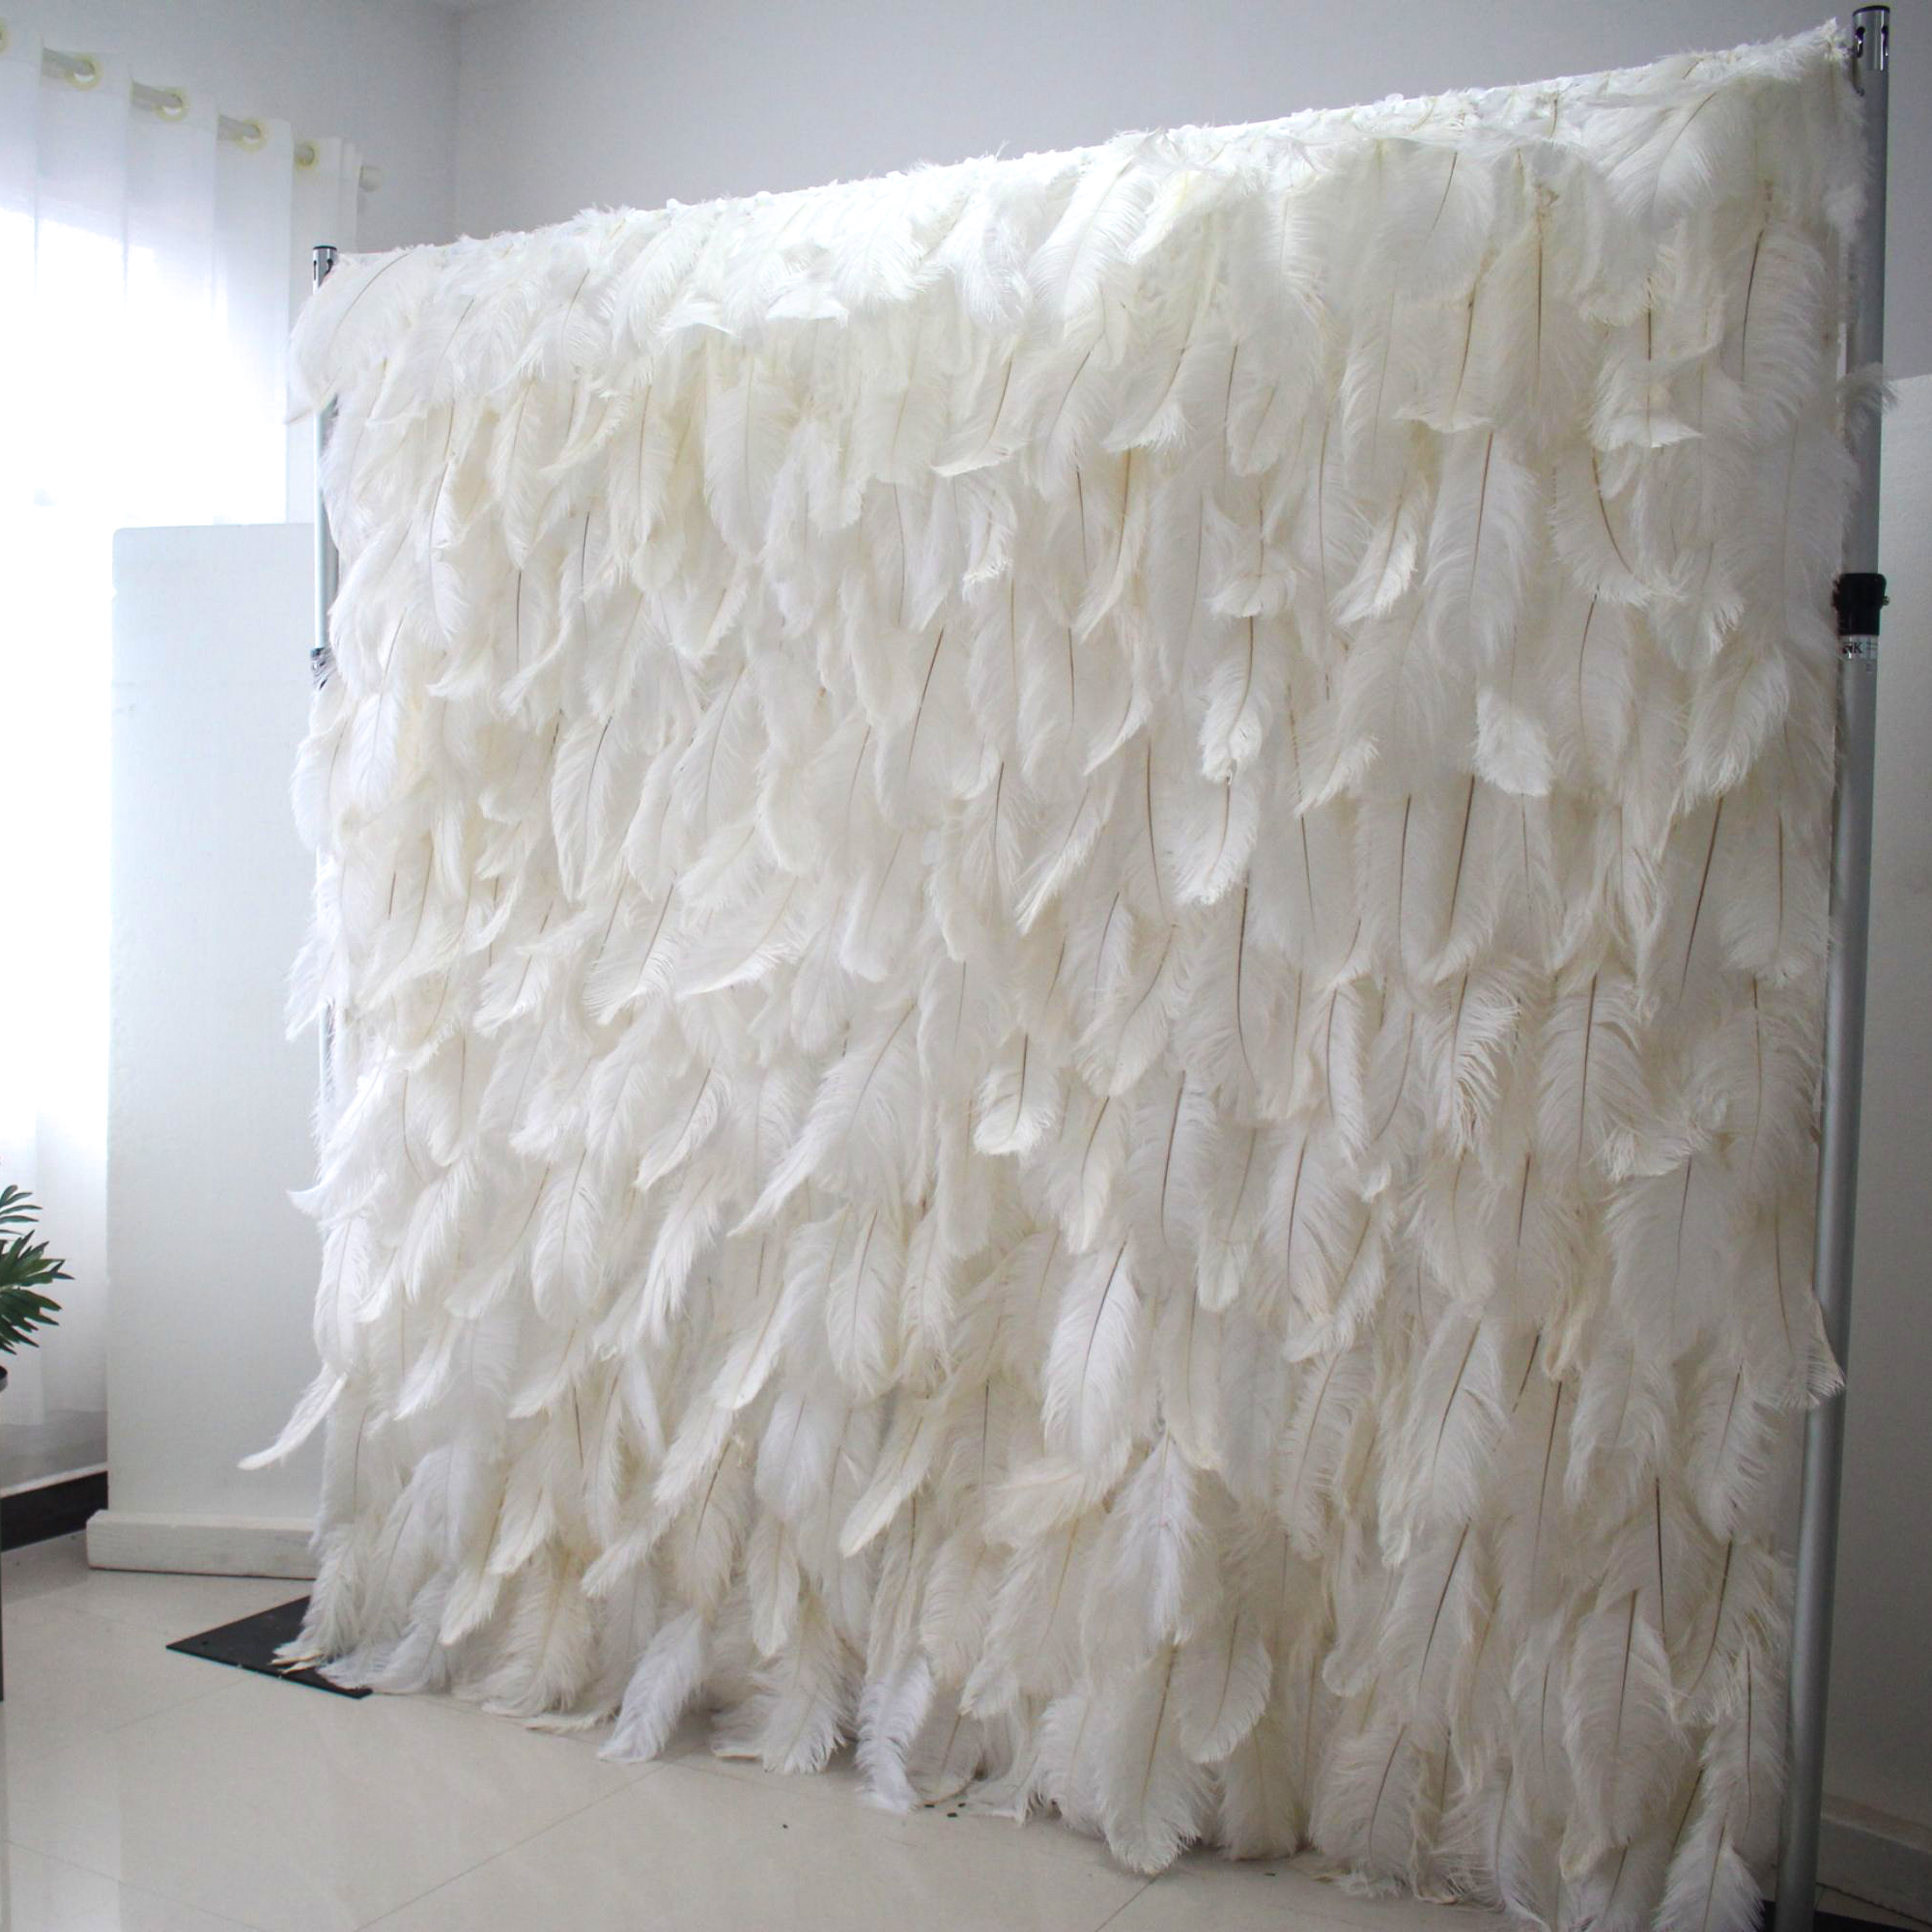 Elegant White Ostrich Feather Wall Backdrop - Roll-Up Fabric Wall - Bridal Party Decor - Wedding Venues Celebration Floral Wall-VF-164